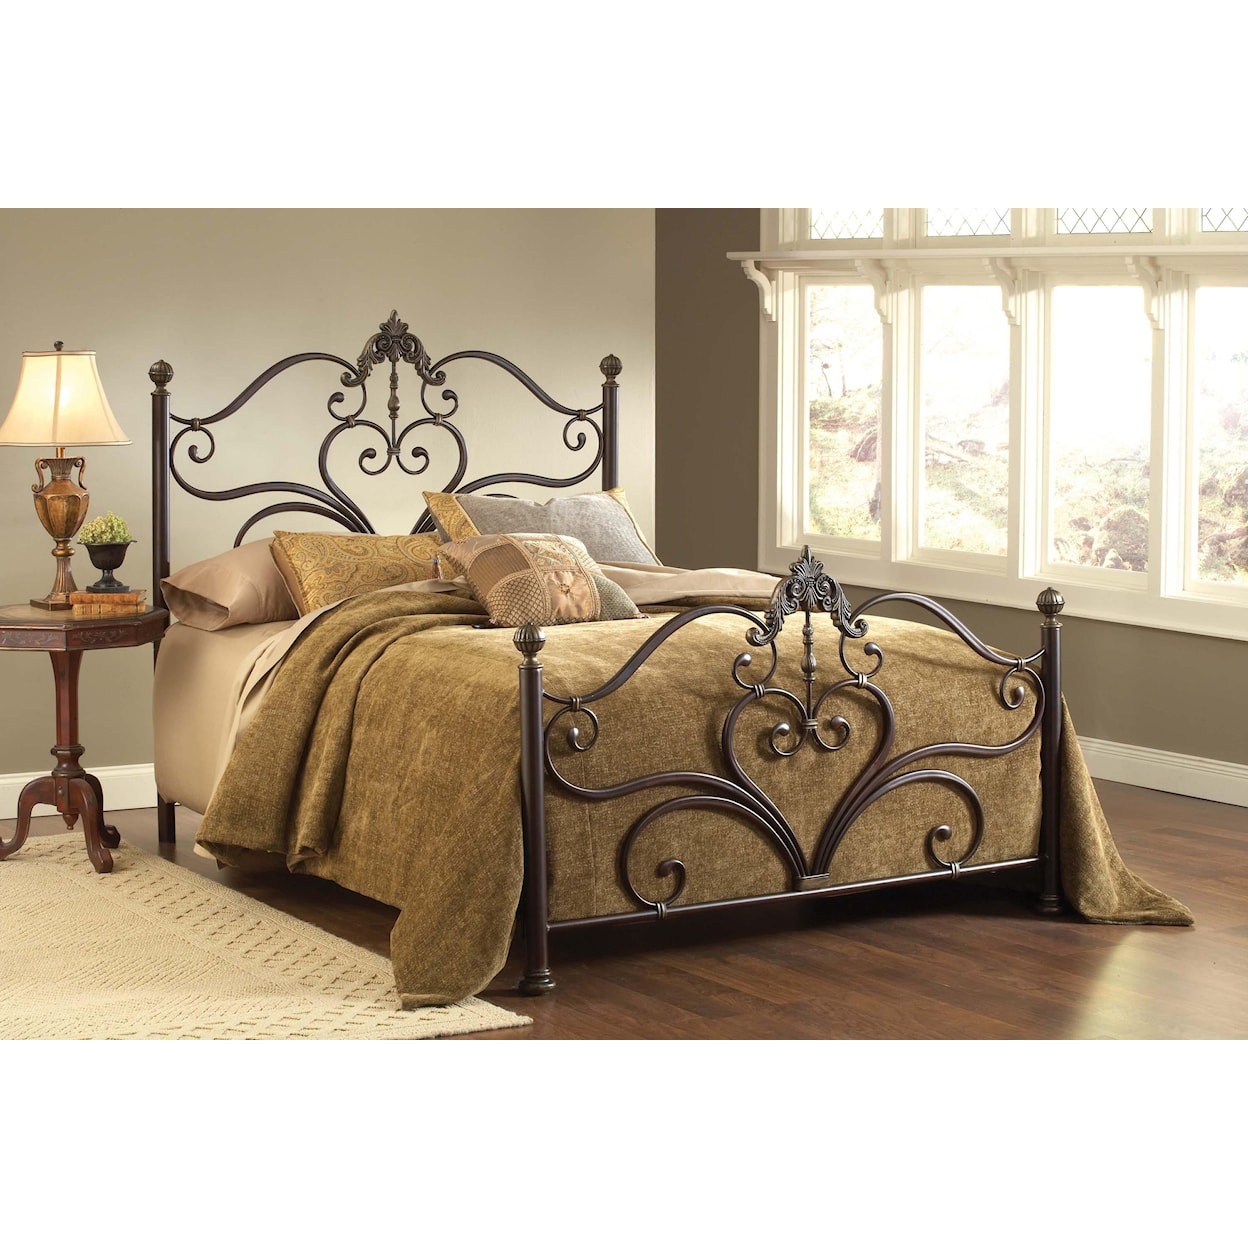 Hillsdale Metal Beds Newton King Bed Set with Scrollwork